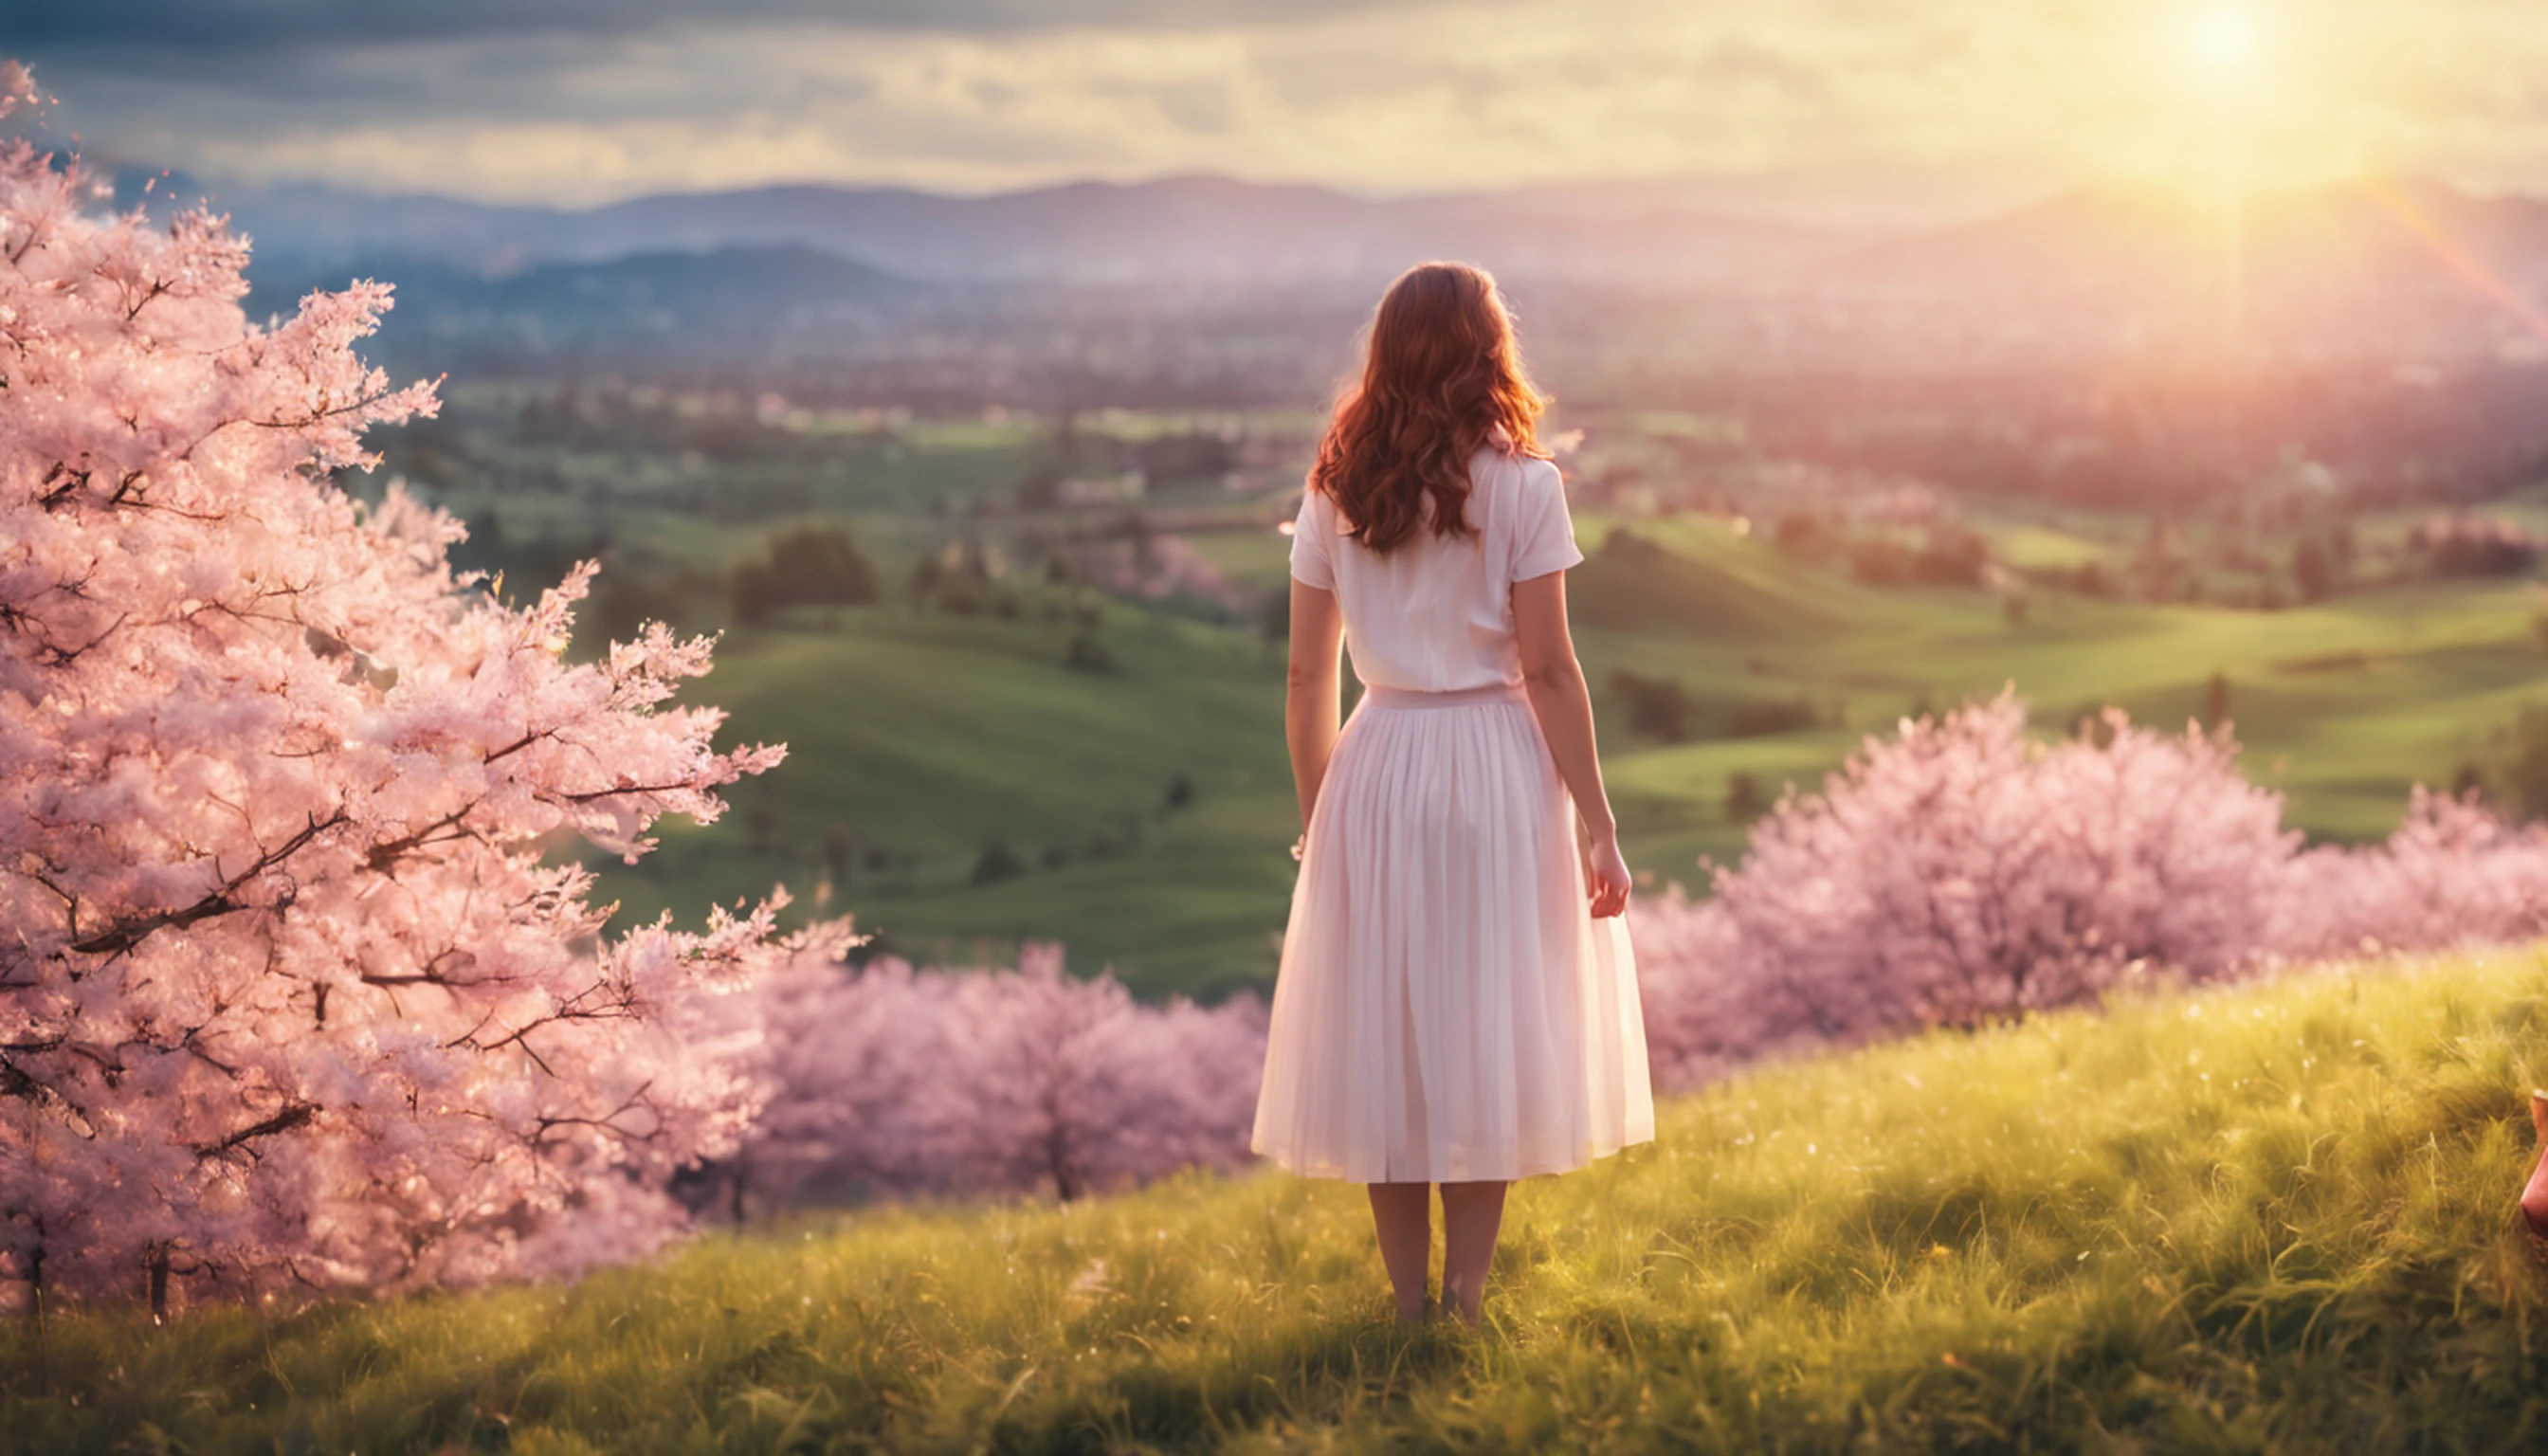 vast landscape photo, (view from the bottom, The sky is above and the open field is below), A 30-year-old girl standing in a field of cherry blossoms looking up, (fullmoon: 1.2), (lightning strikes: 0.9), (nebula: 1.3), distant mountains, Árvores BREAK Crafting Art, (warm light: 1.2), (fire flies: 1.2), lights, lot of purple and orange, details Intricate, volumeric lighting, realism BREAK (Masterpiece artwork: 1.2), (best qualityer), 4K, ultra detali, (dynamic compositing: 1.4), very detailed and colorful details, (rainbow colors: 1.2), (bright illumination, Atmospheric Illumination), dreamy, magica, (独奏: 1.2)